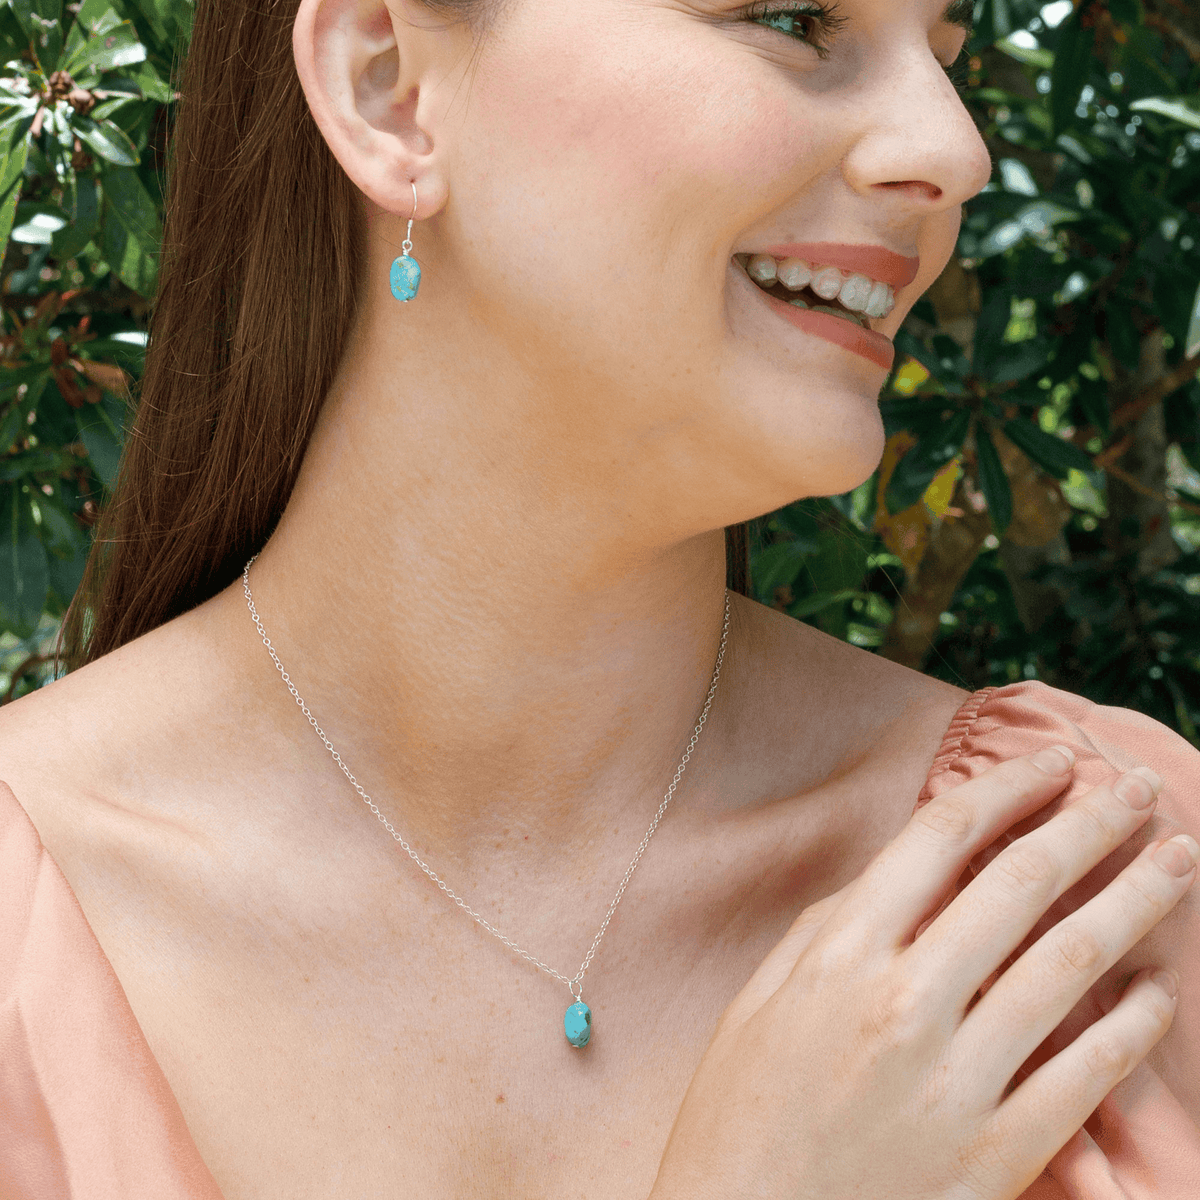 Raw Turquoise Crystal Earrings & Necklace Set - Raw Turquoise Crystal Earrings & Necklace Set - Sterling Silver - Luna Tide Handmade Crystal Jewellery